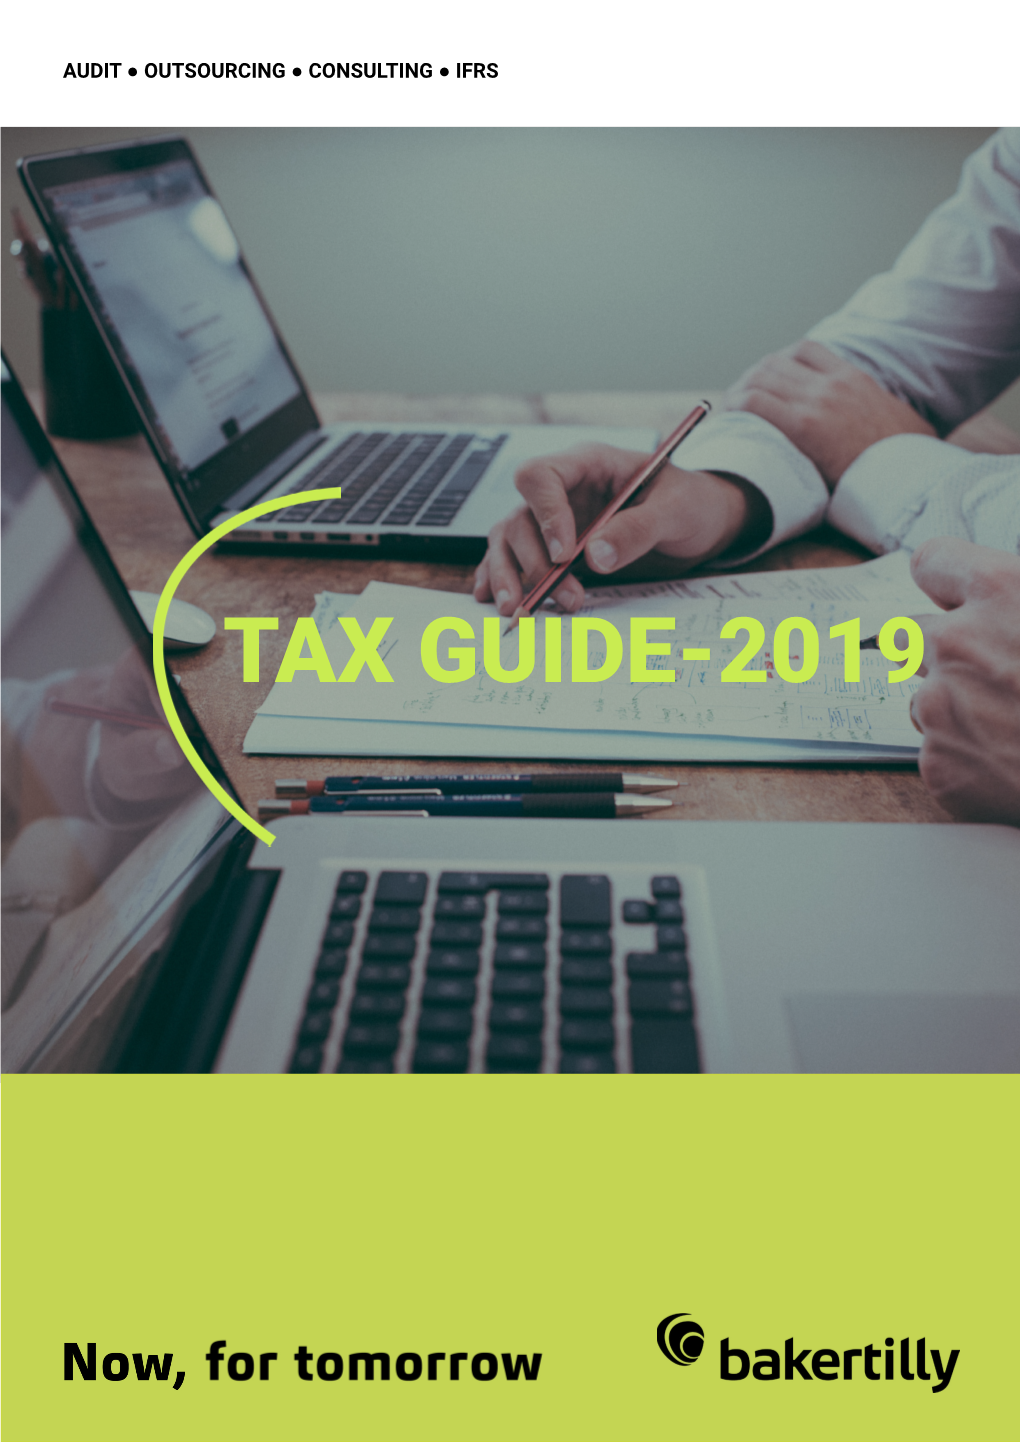 Tax Guide-2019 Contents